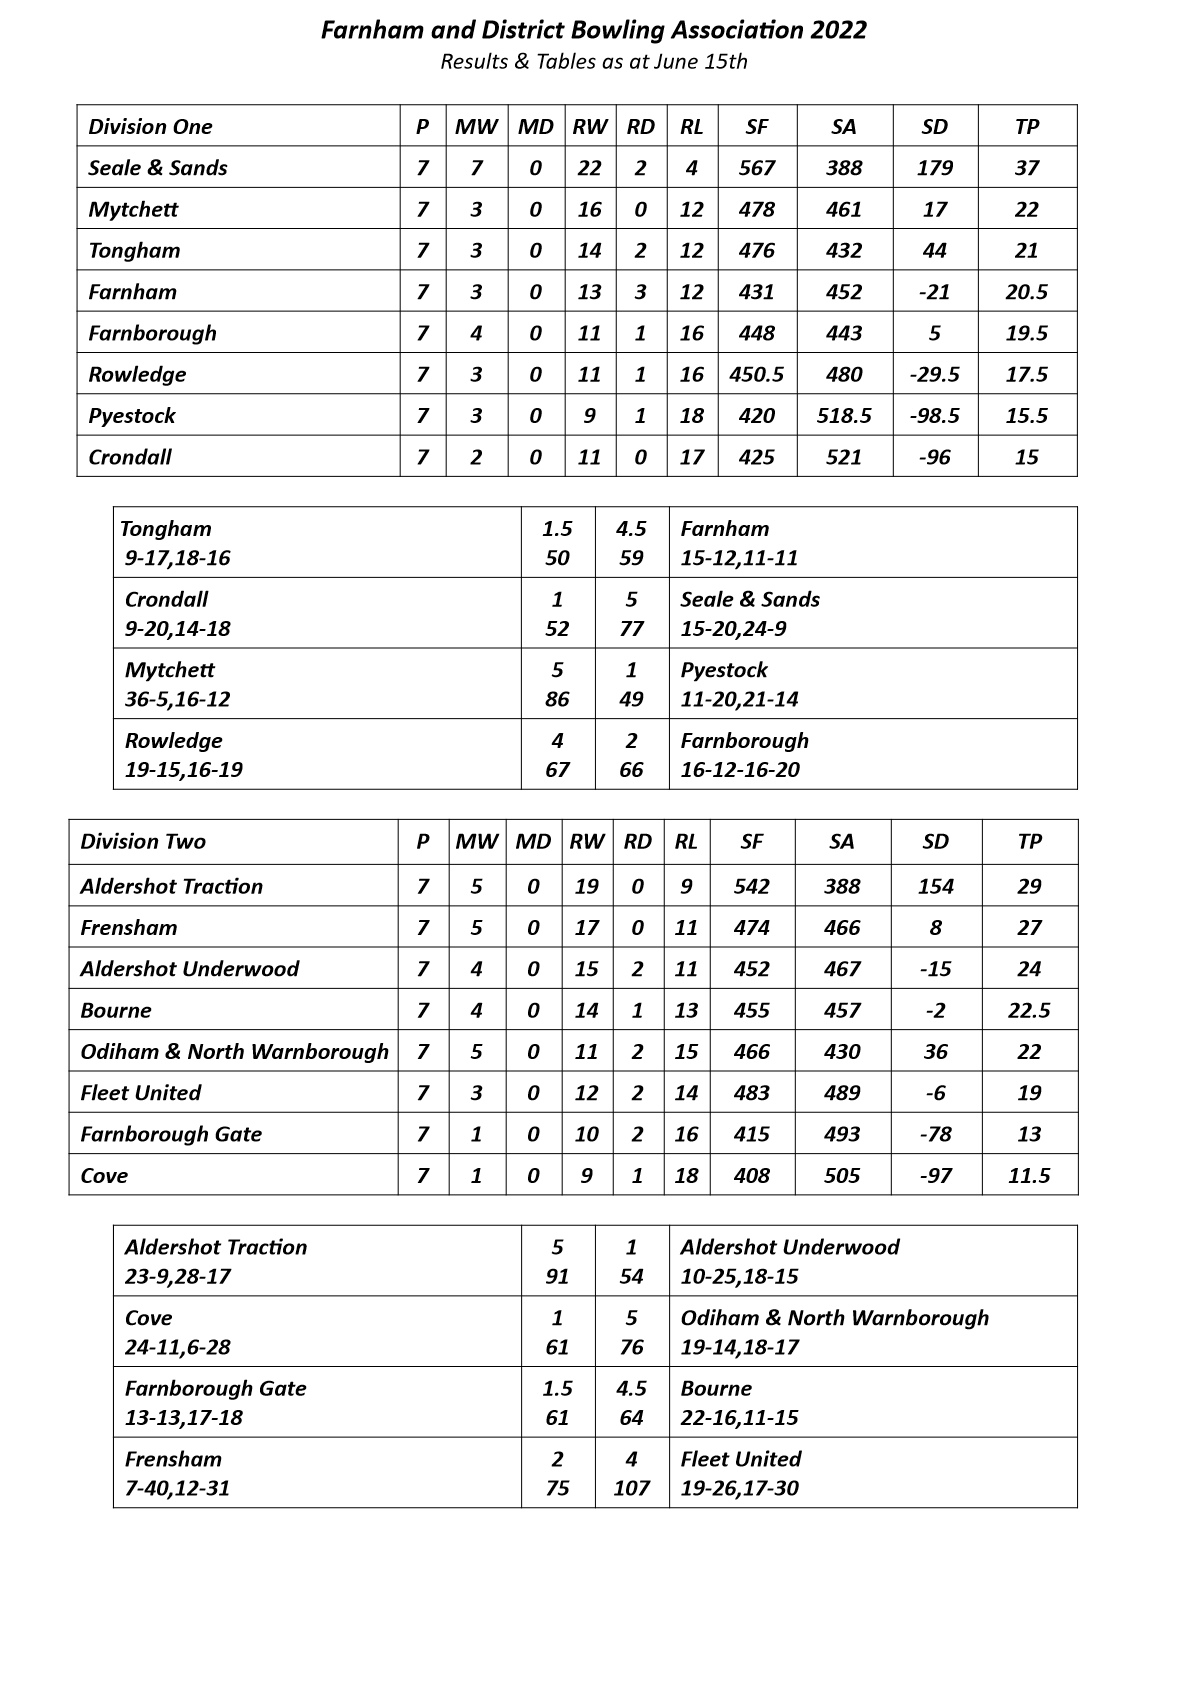  Farnham&District Bowling Association  Tables & Results as at June 15th